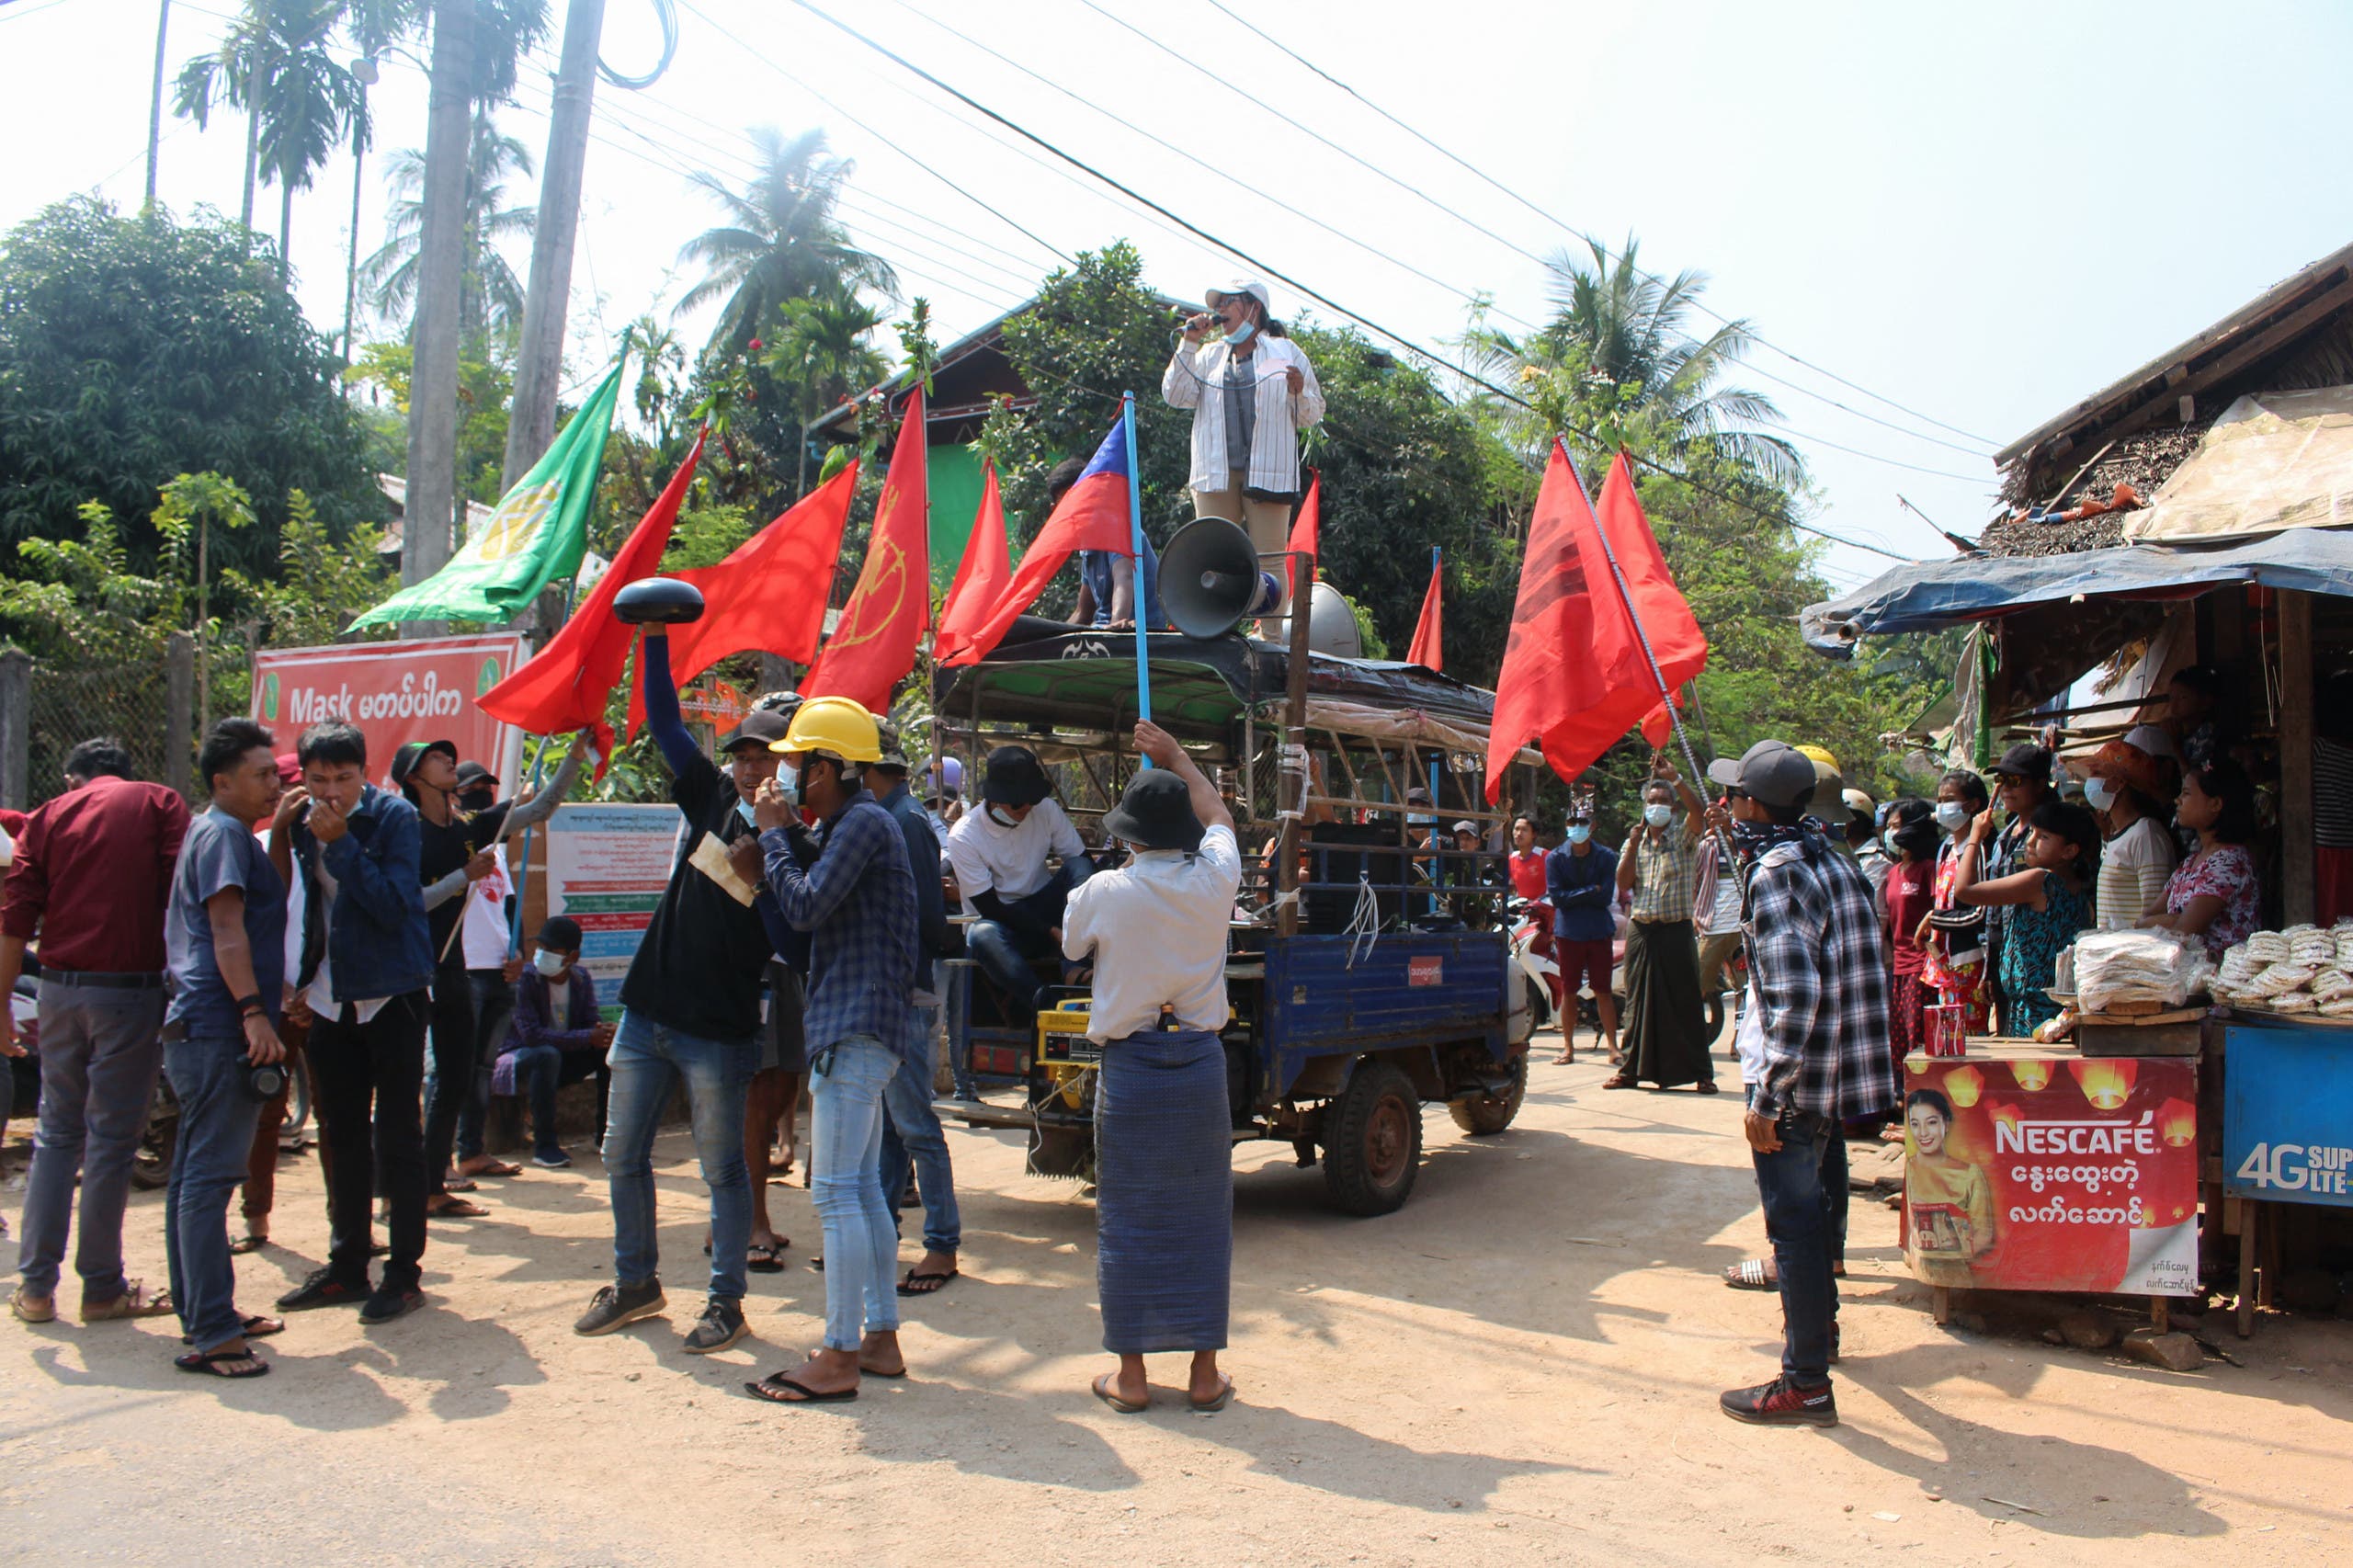 This handout photo taken and released by Dawei Watch on March 21, 2021 shows protesters taking part in a demonstration against the military coup in Launglone township in Myanmar's Dawei district.